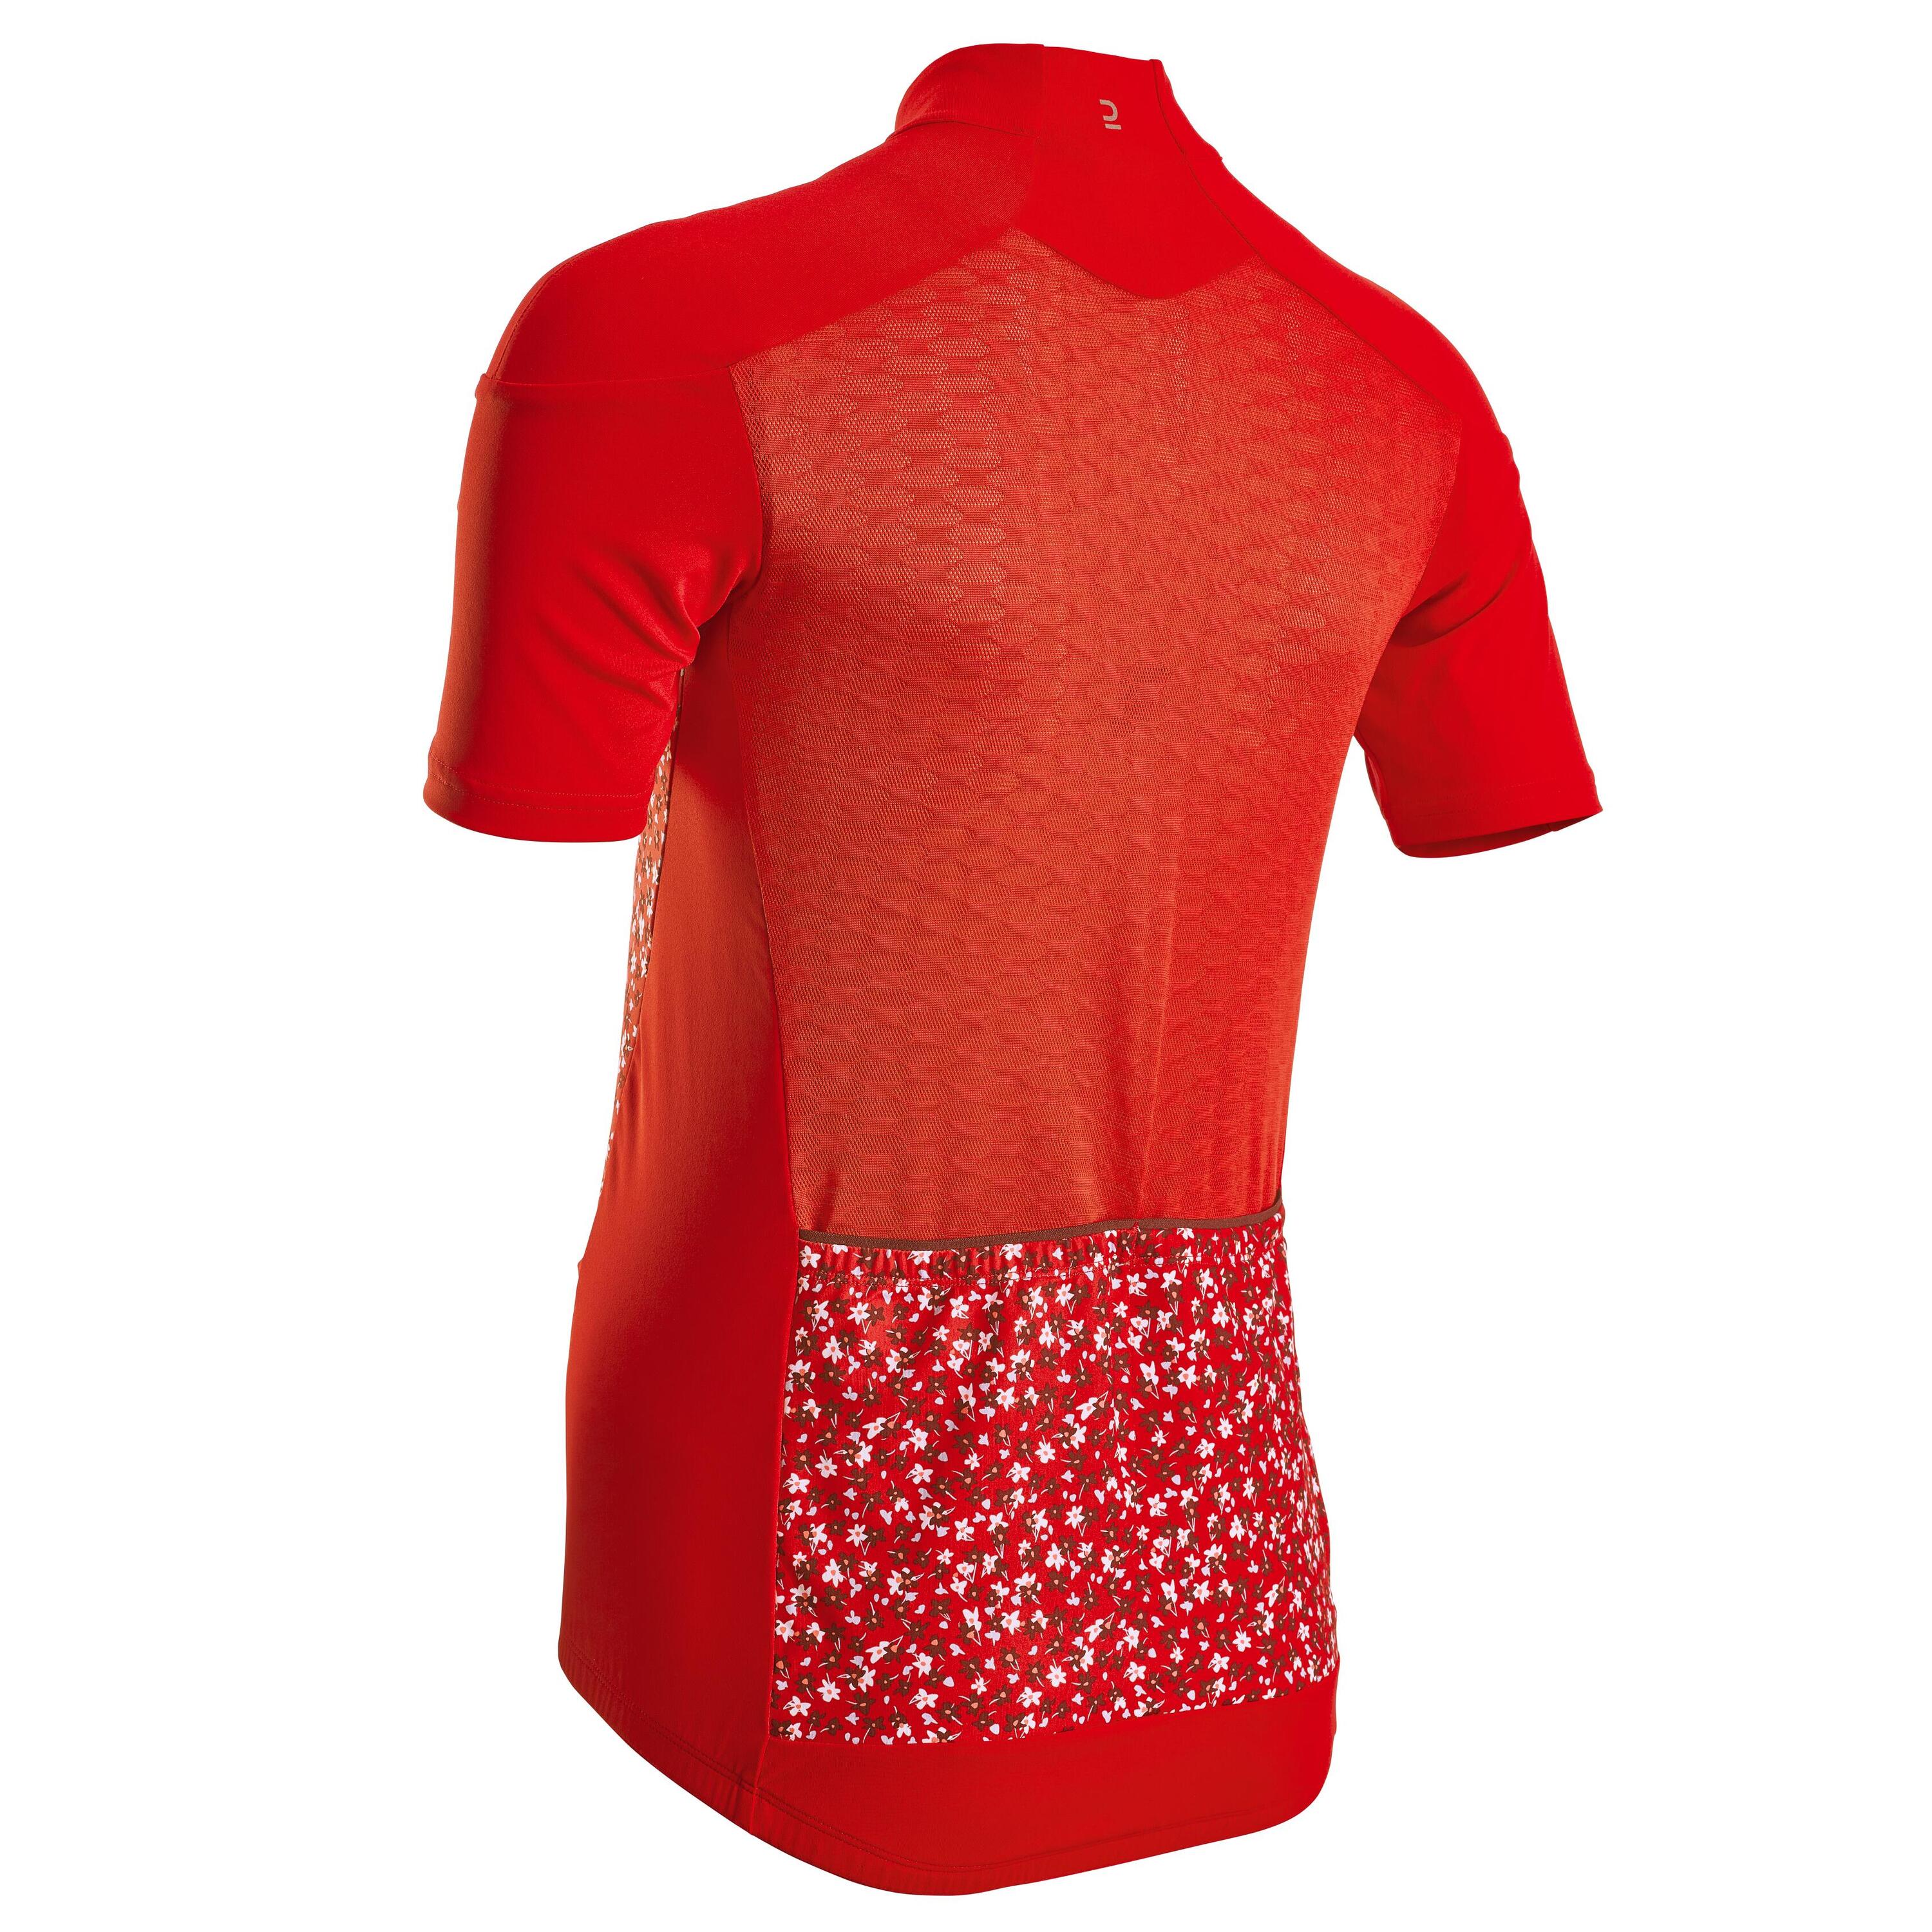 Women's Short-Sleeved Road Cycling Jersey RC500 - Floral/Red 2/7